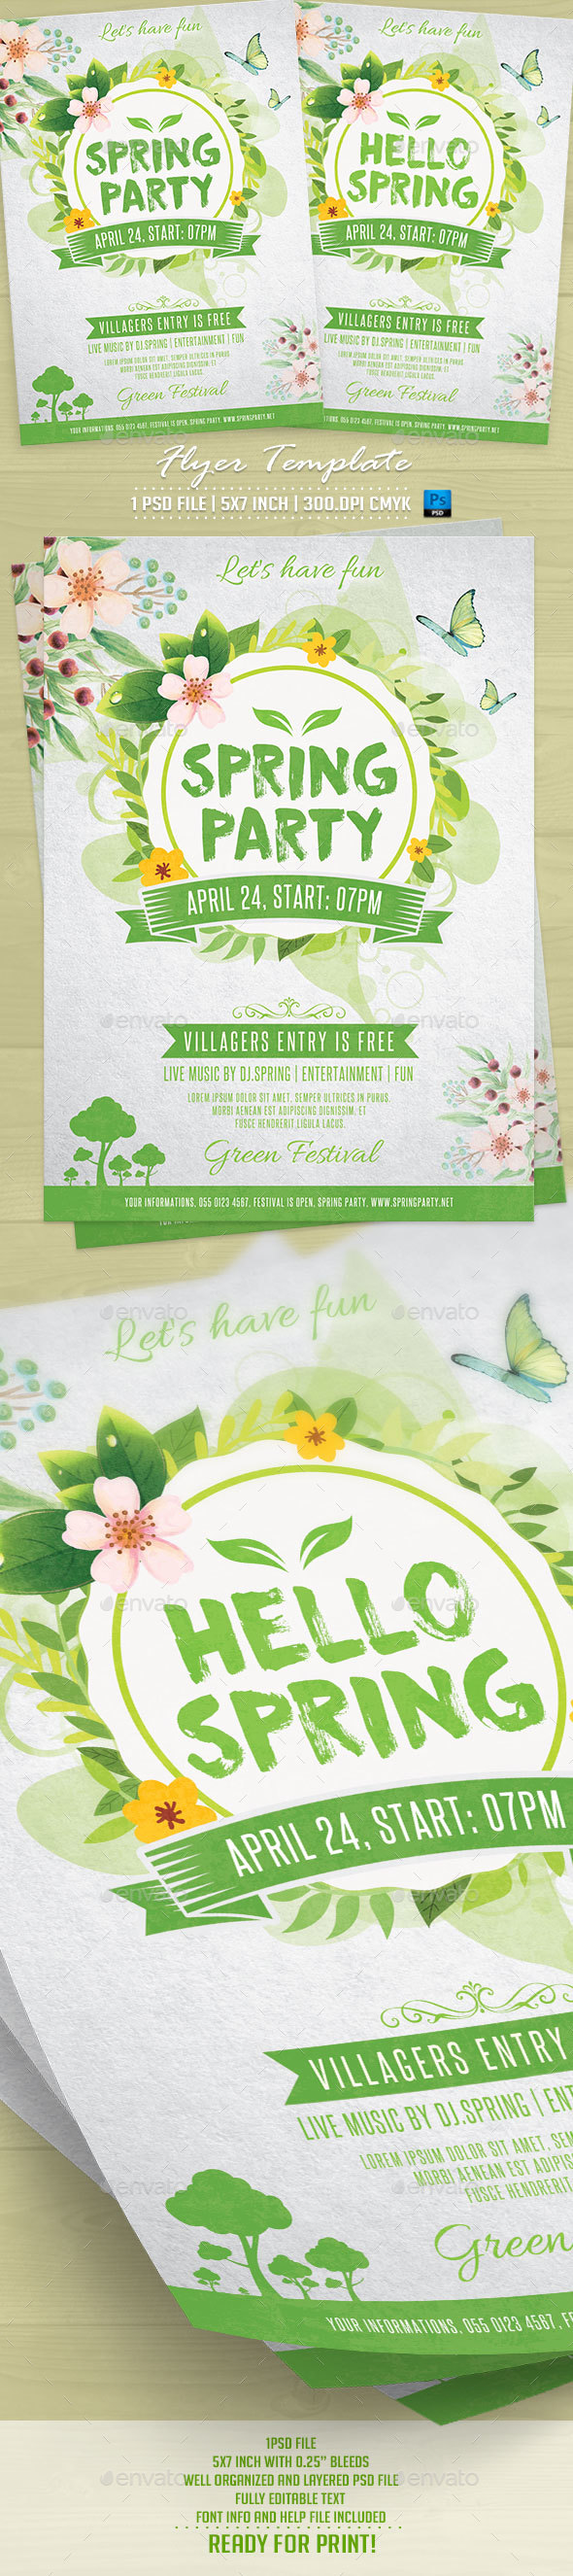 Spring Party Flyer Template v2